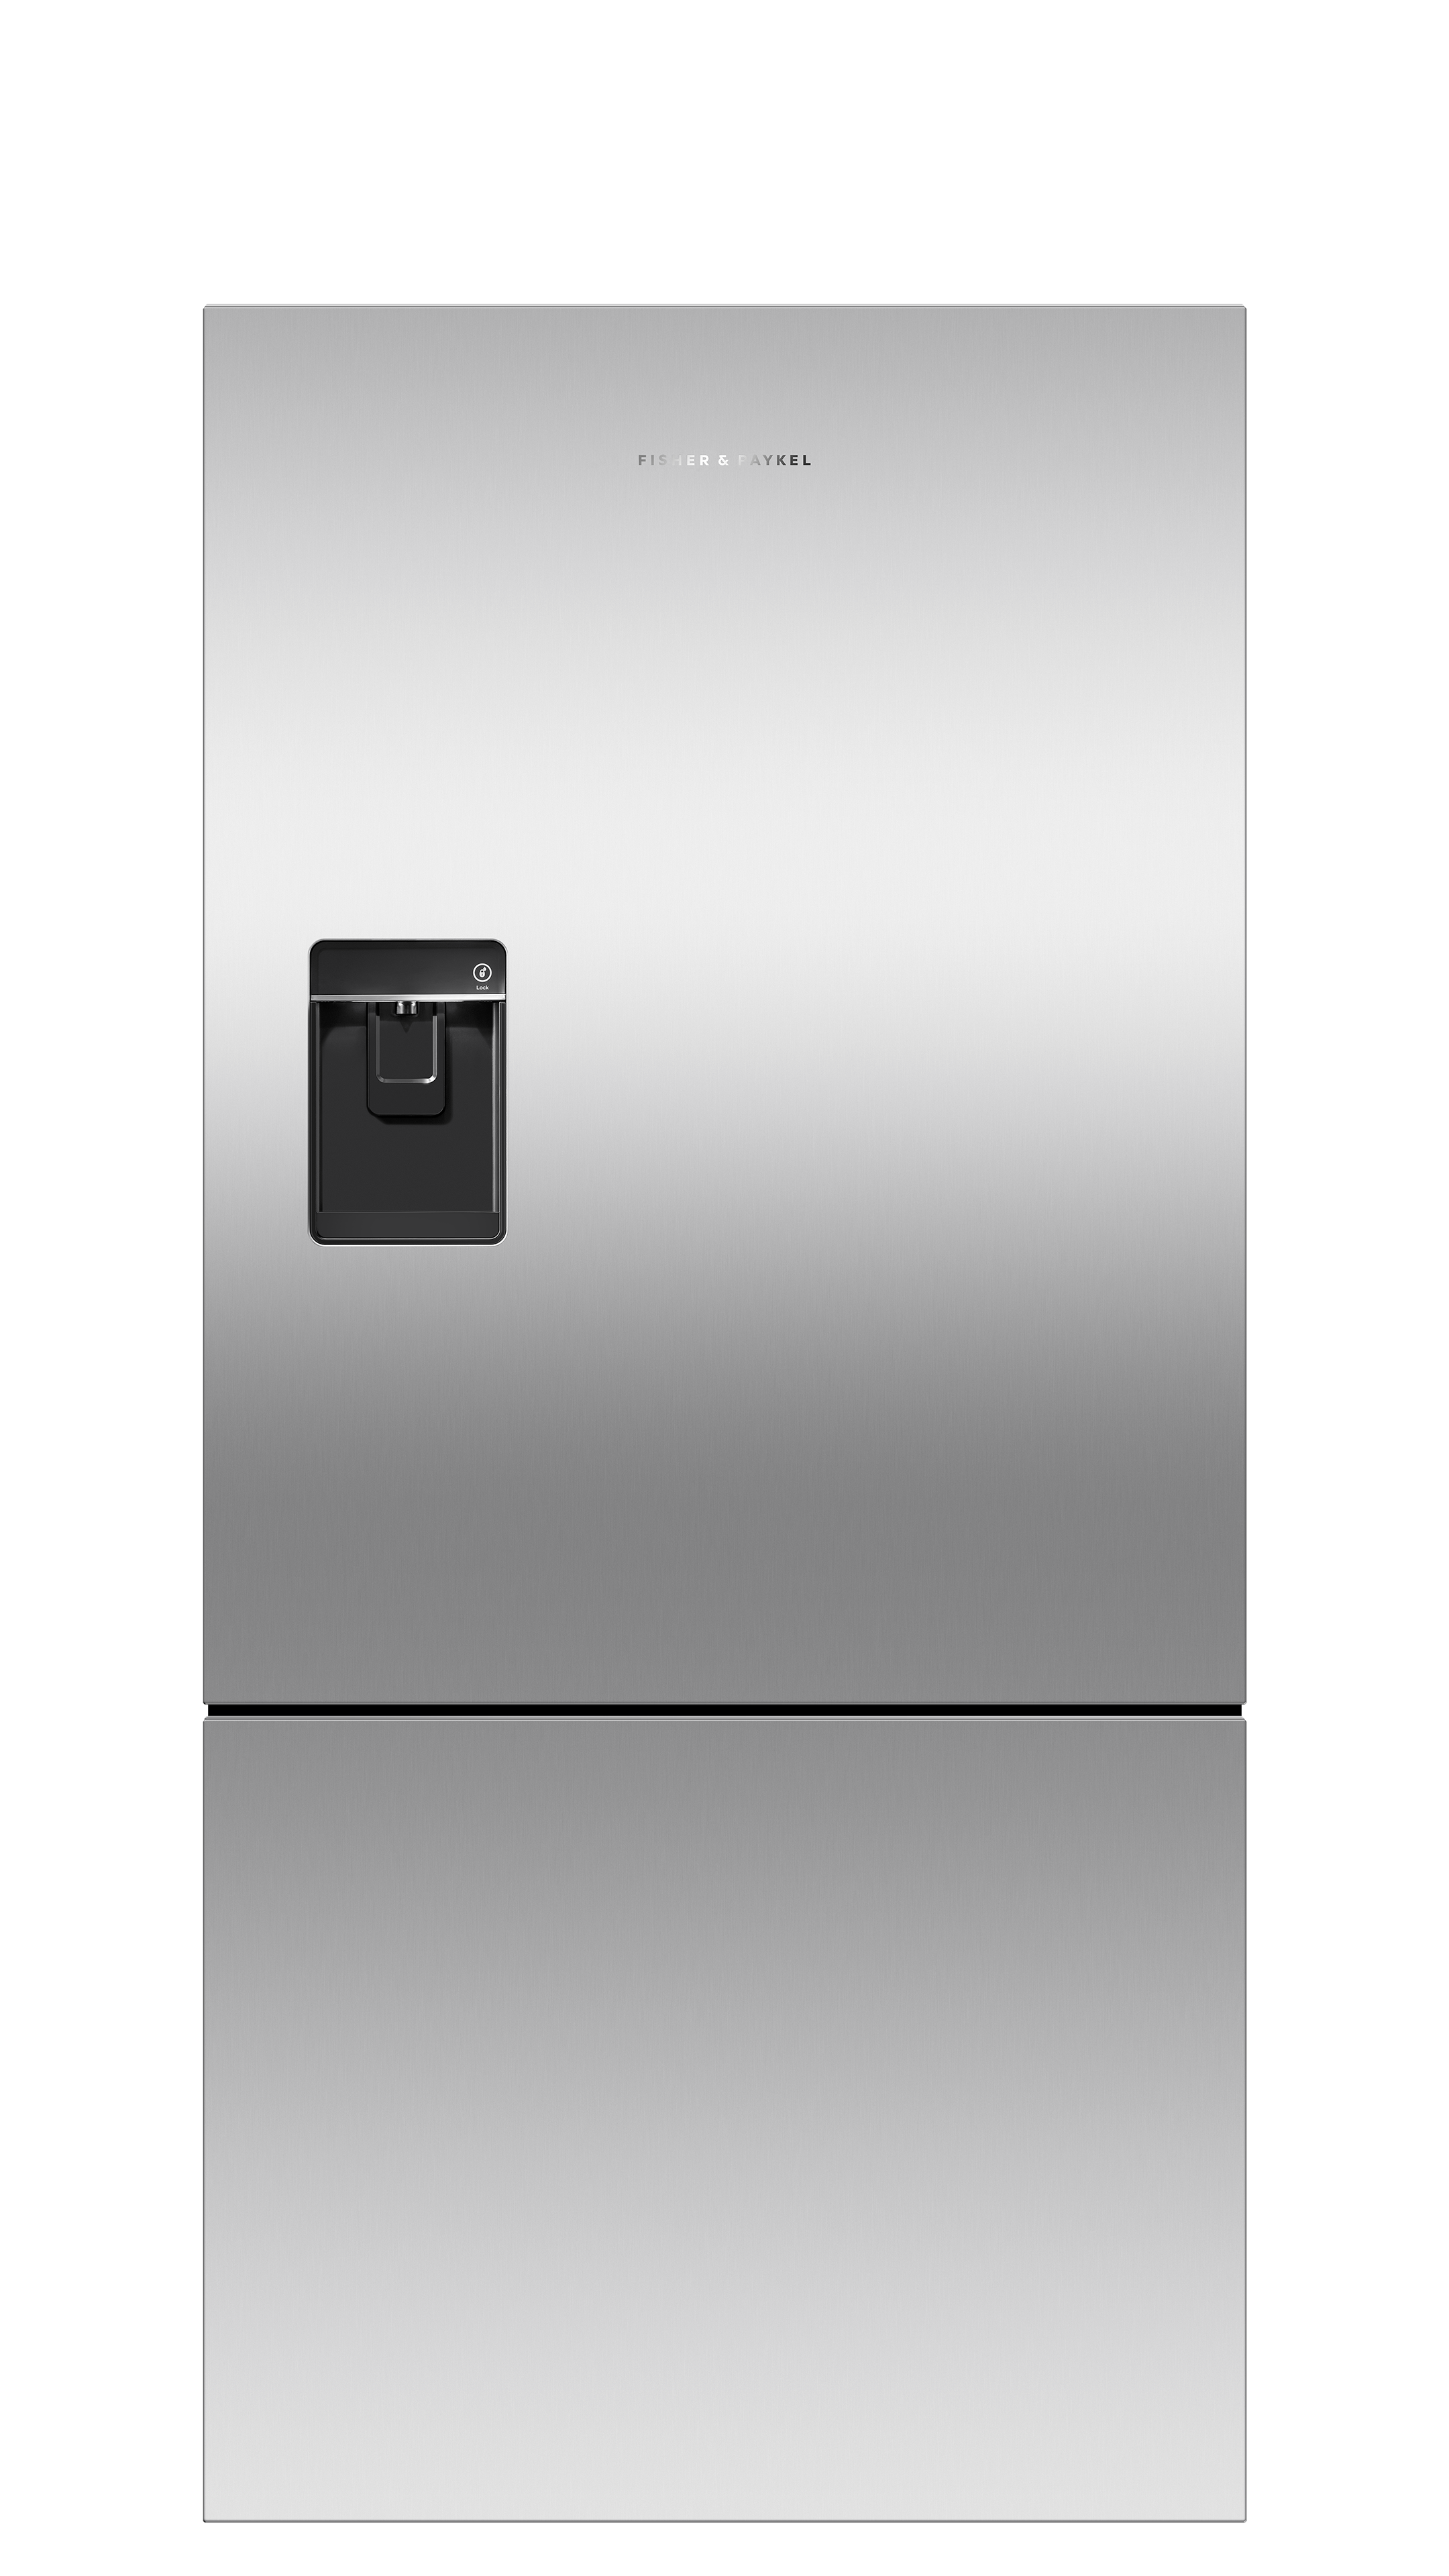 Model: RF170BLPUX6 N | Fisher and Paykel Freestanding Refrigerator Freezer, 32", 17.5 cu ft, Ice & Water